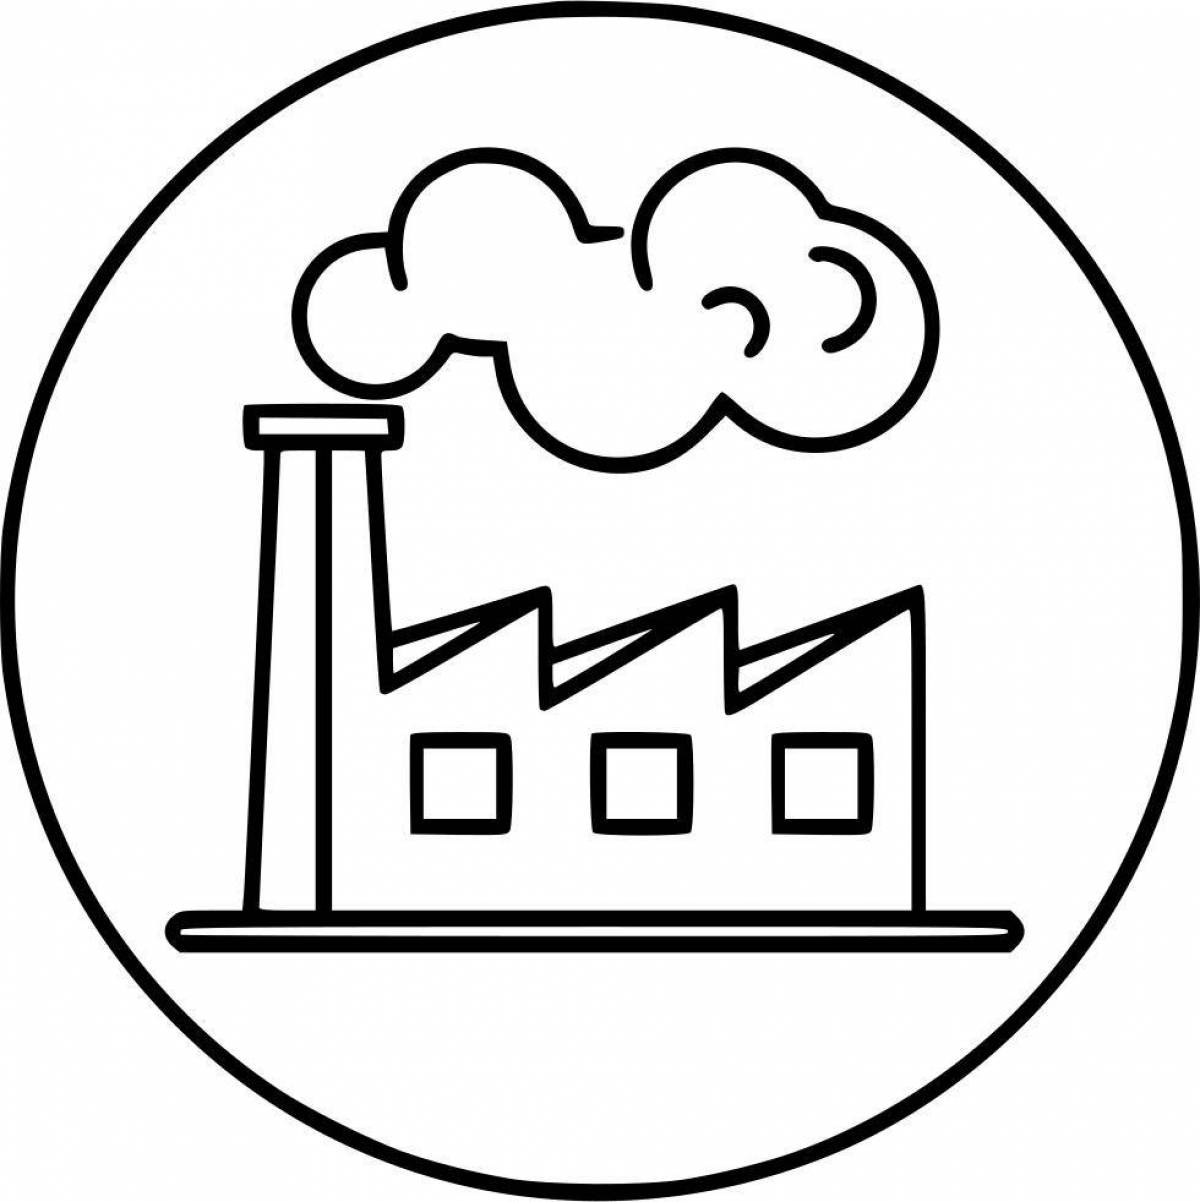 Creative air pollution coloring page